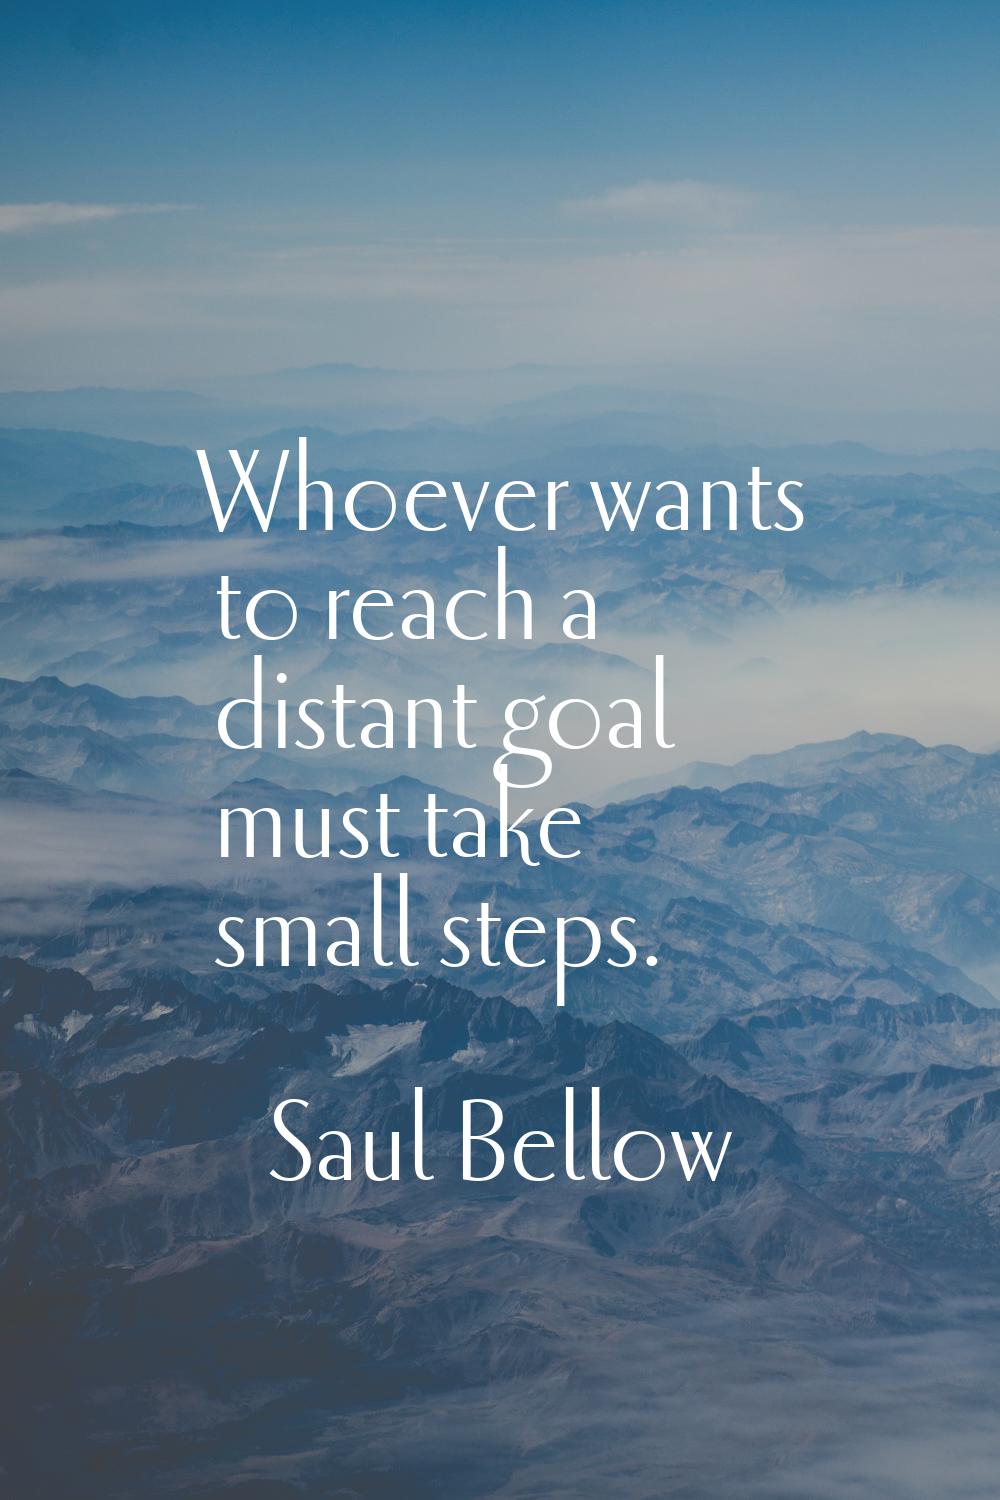 Whoever wants to reach a distant goal must take small steps.